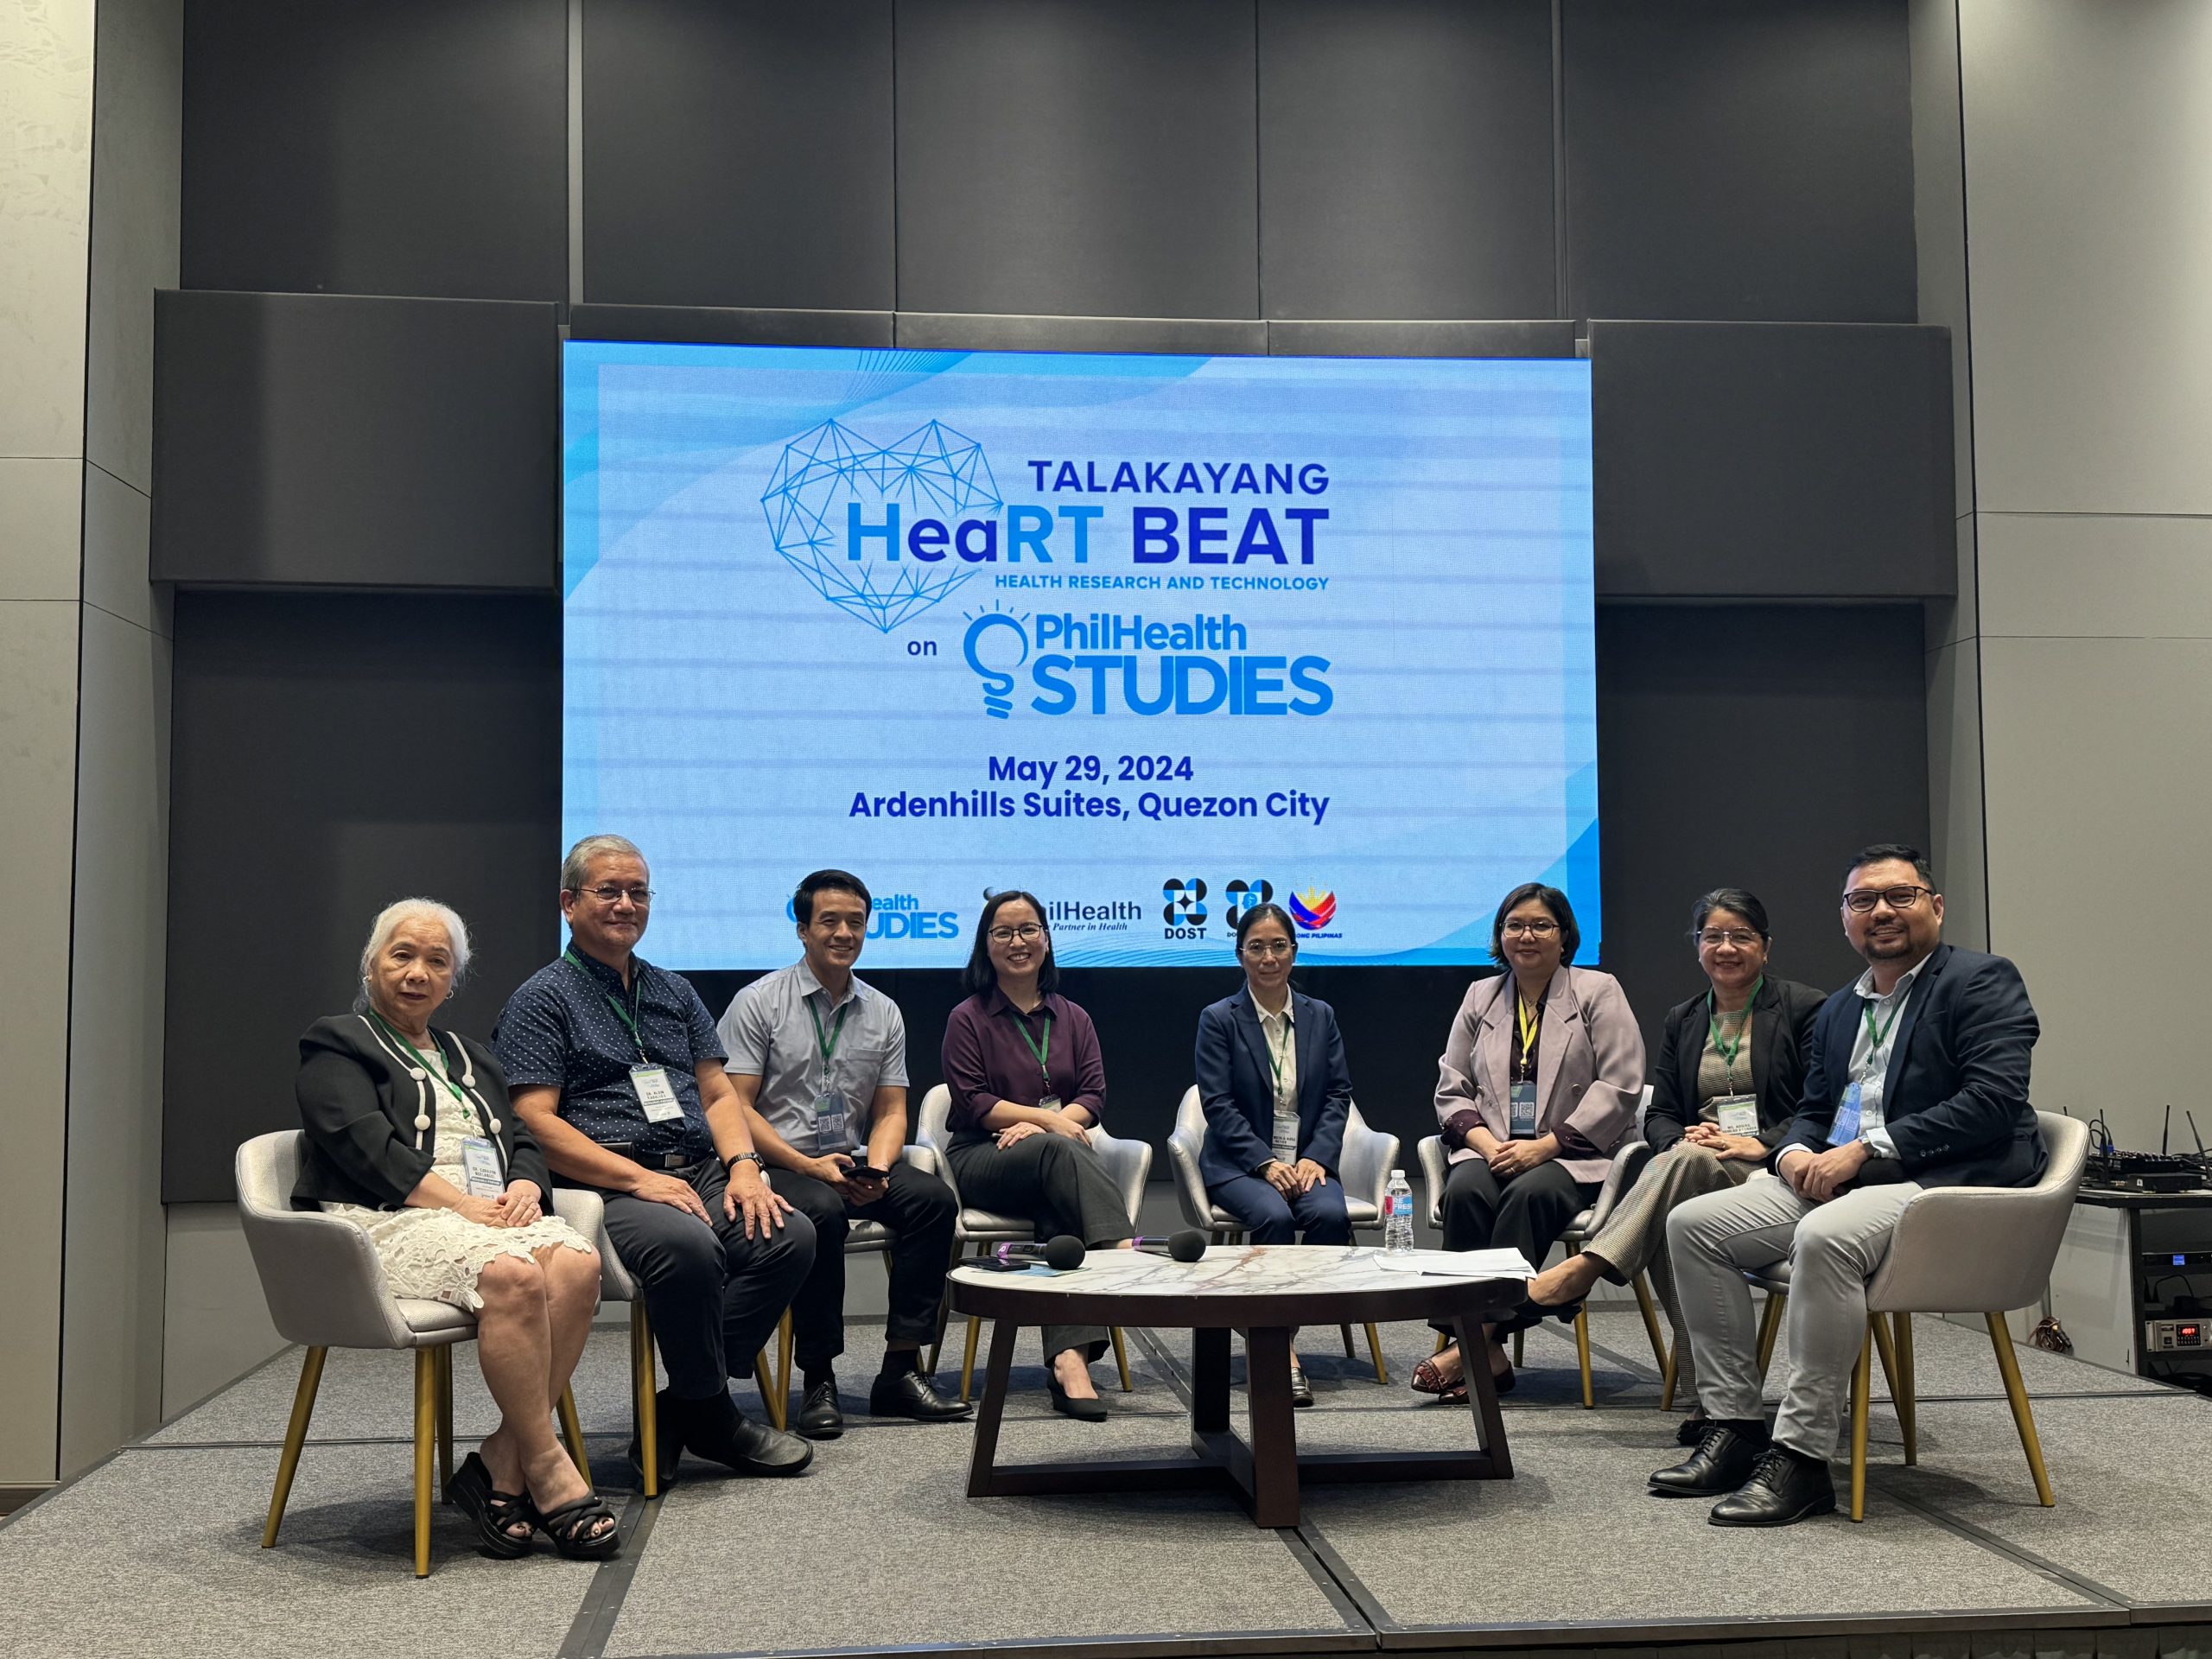 DOST and PhilHealth aim to make health benefit packages and services more accessible to Pinoys